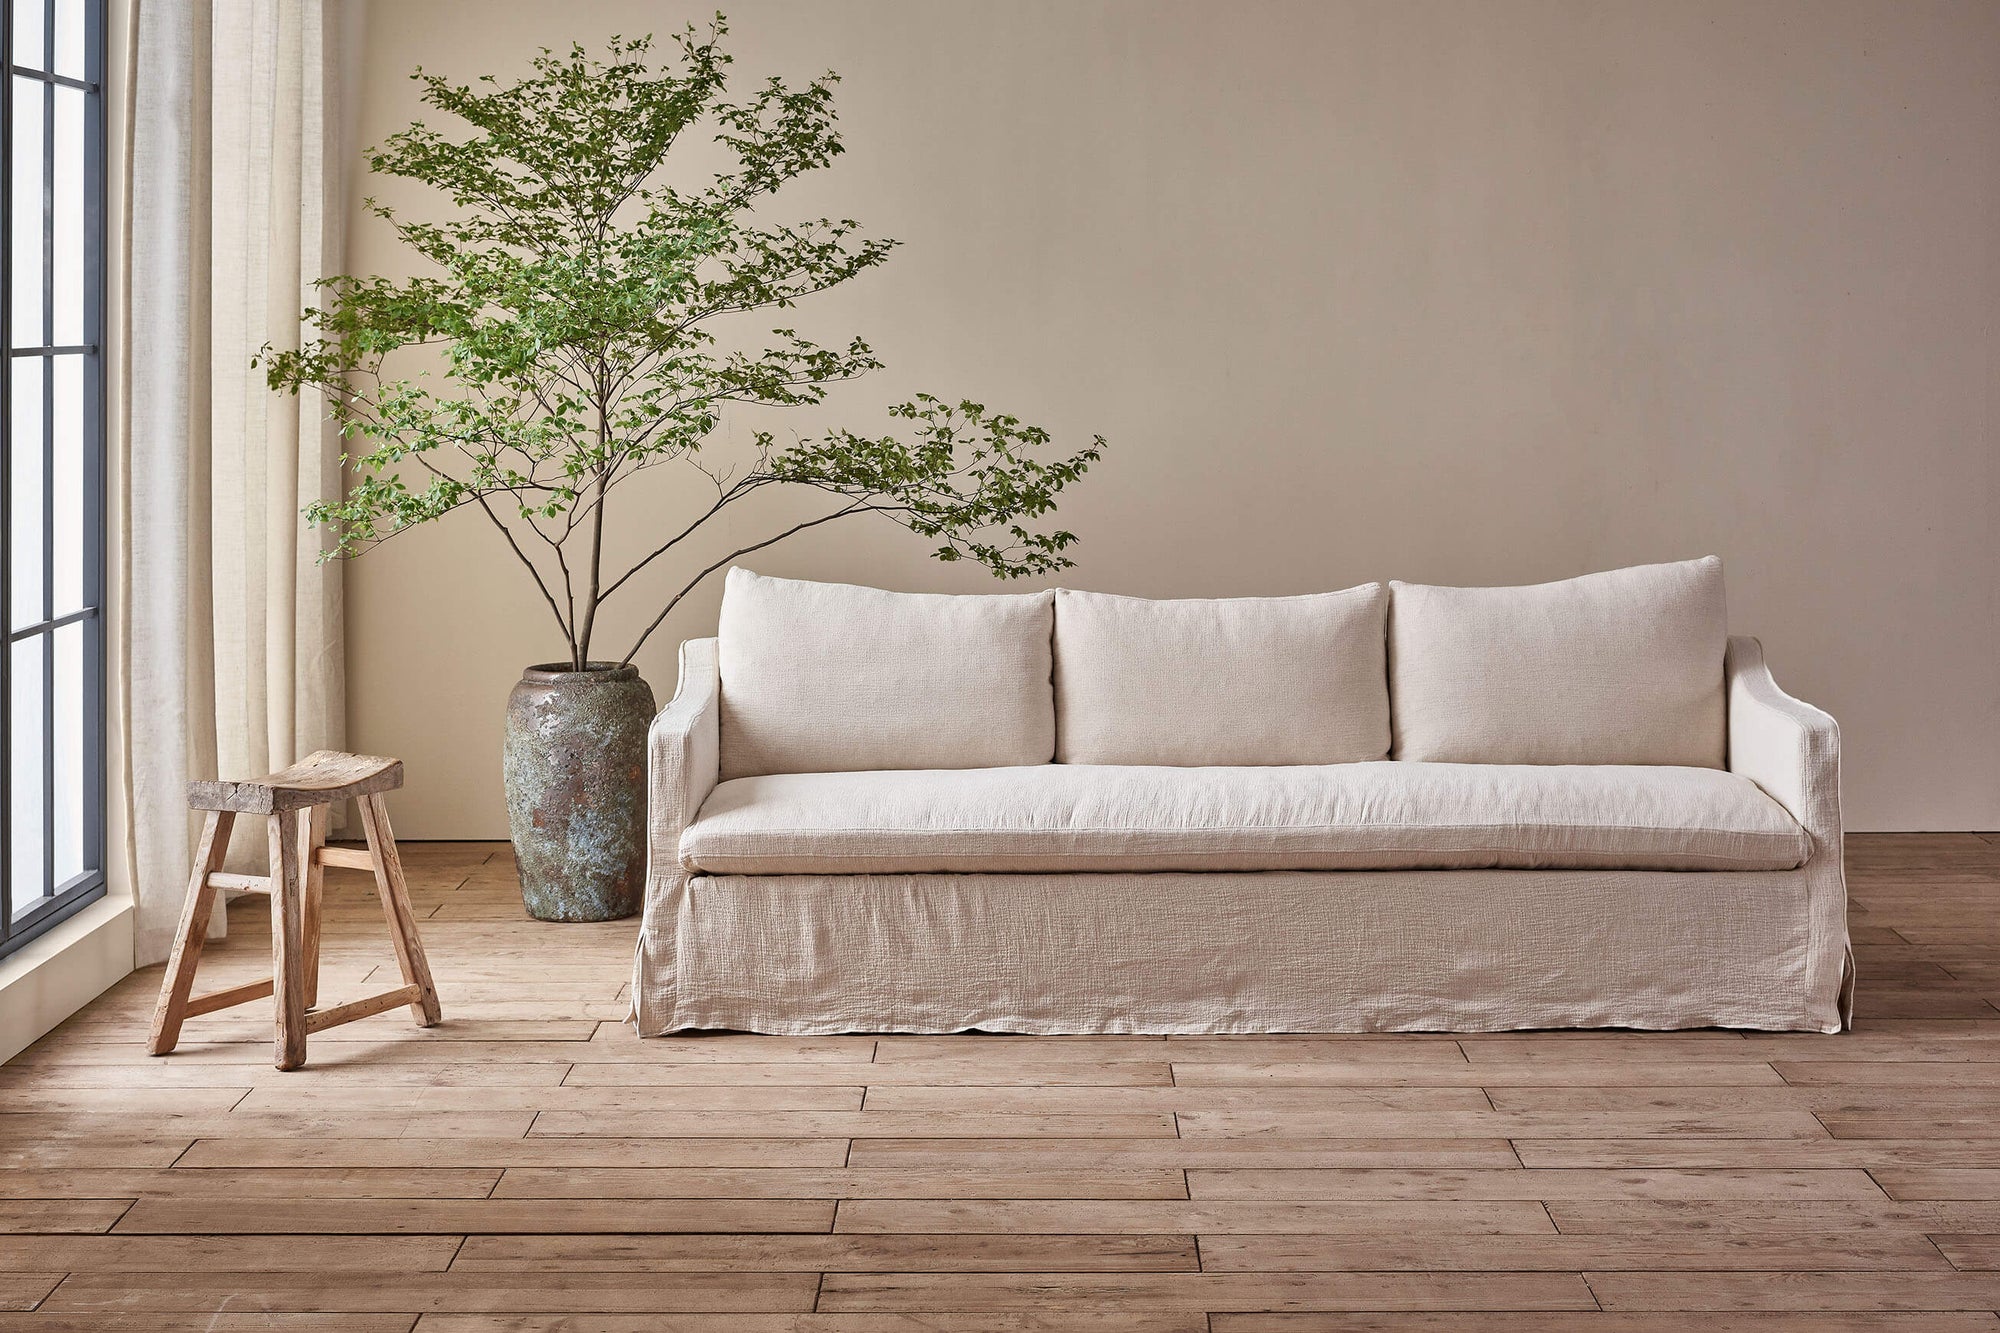 Amelia 96" Sofa in Corn Silk, a light beige Washed Cotton Linen, placed in a room next to a potted tree and a stool